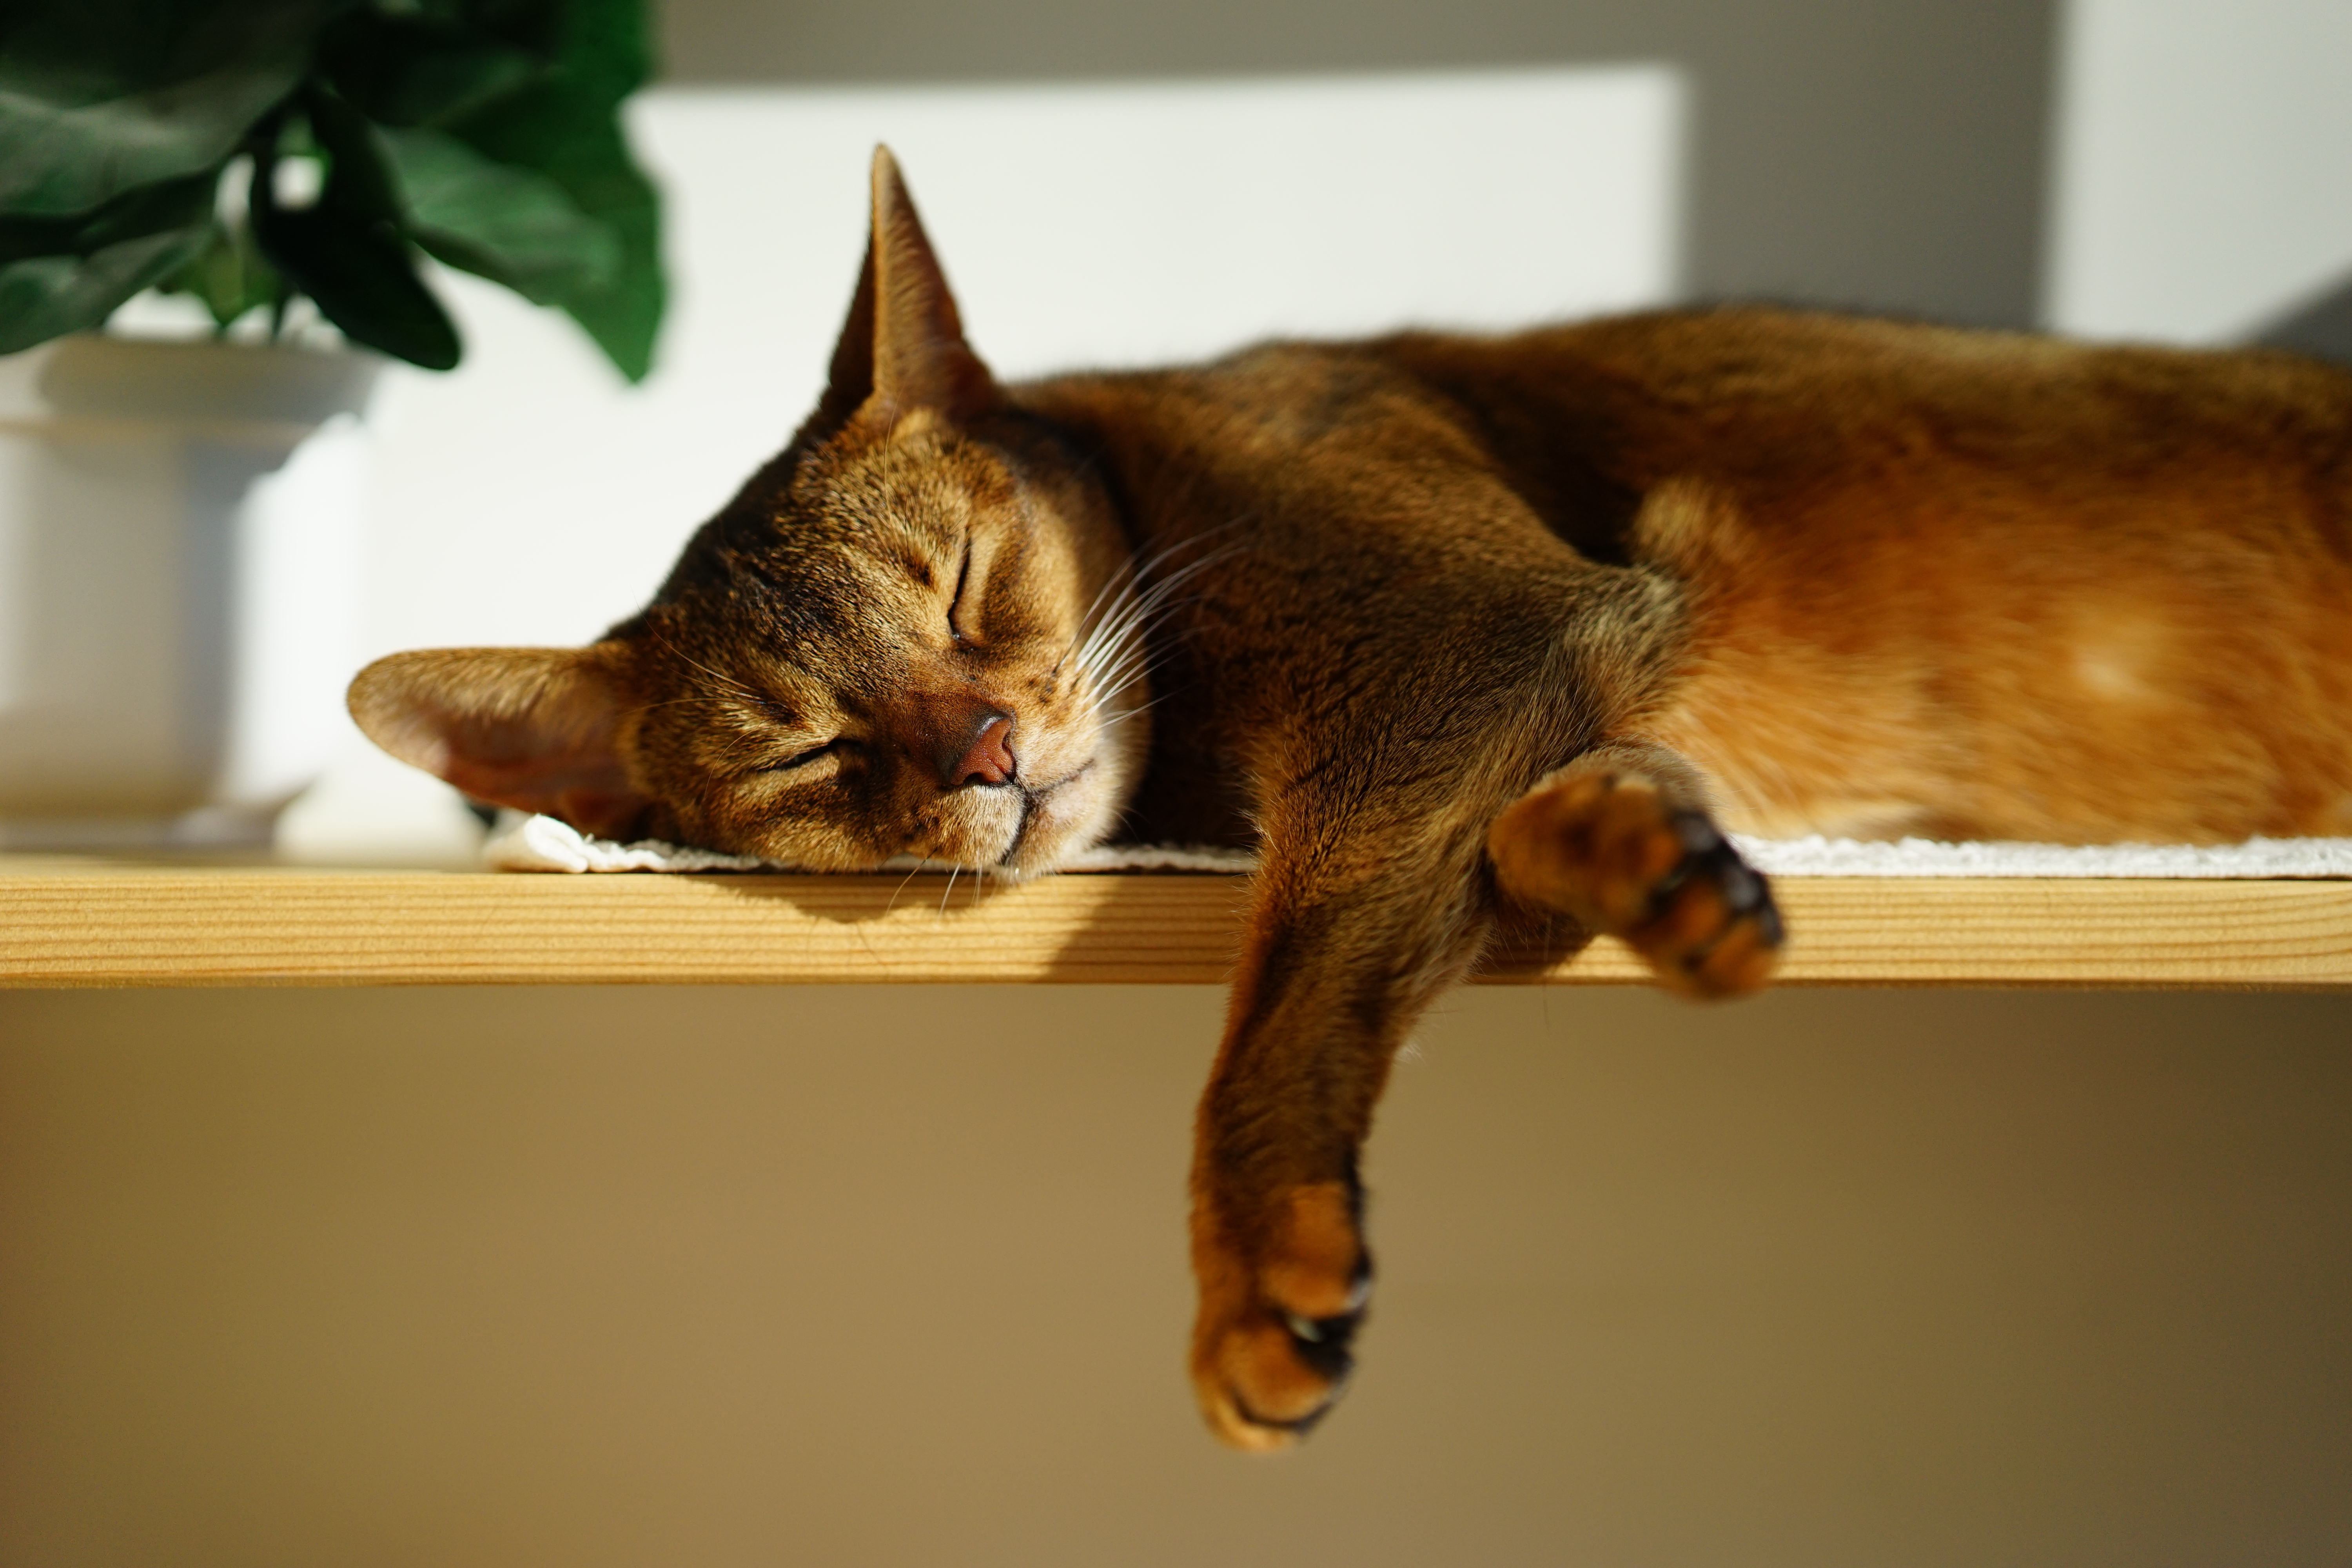 Wallpaper, fauna, small to medium sized cats, whiskers, cat like mammal, abyssinian, fur, snout, carnivoran, domestic short haired cat, tabby cat, kitten, paw 6000x4000